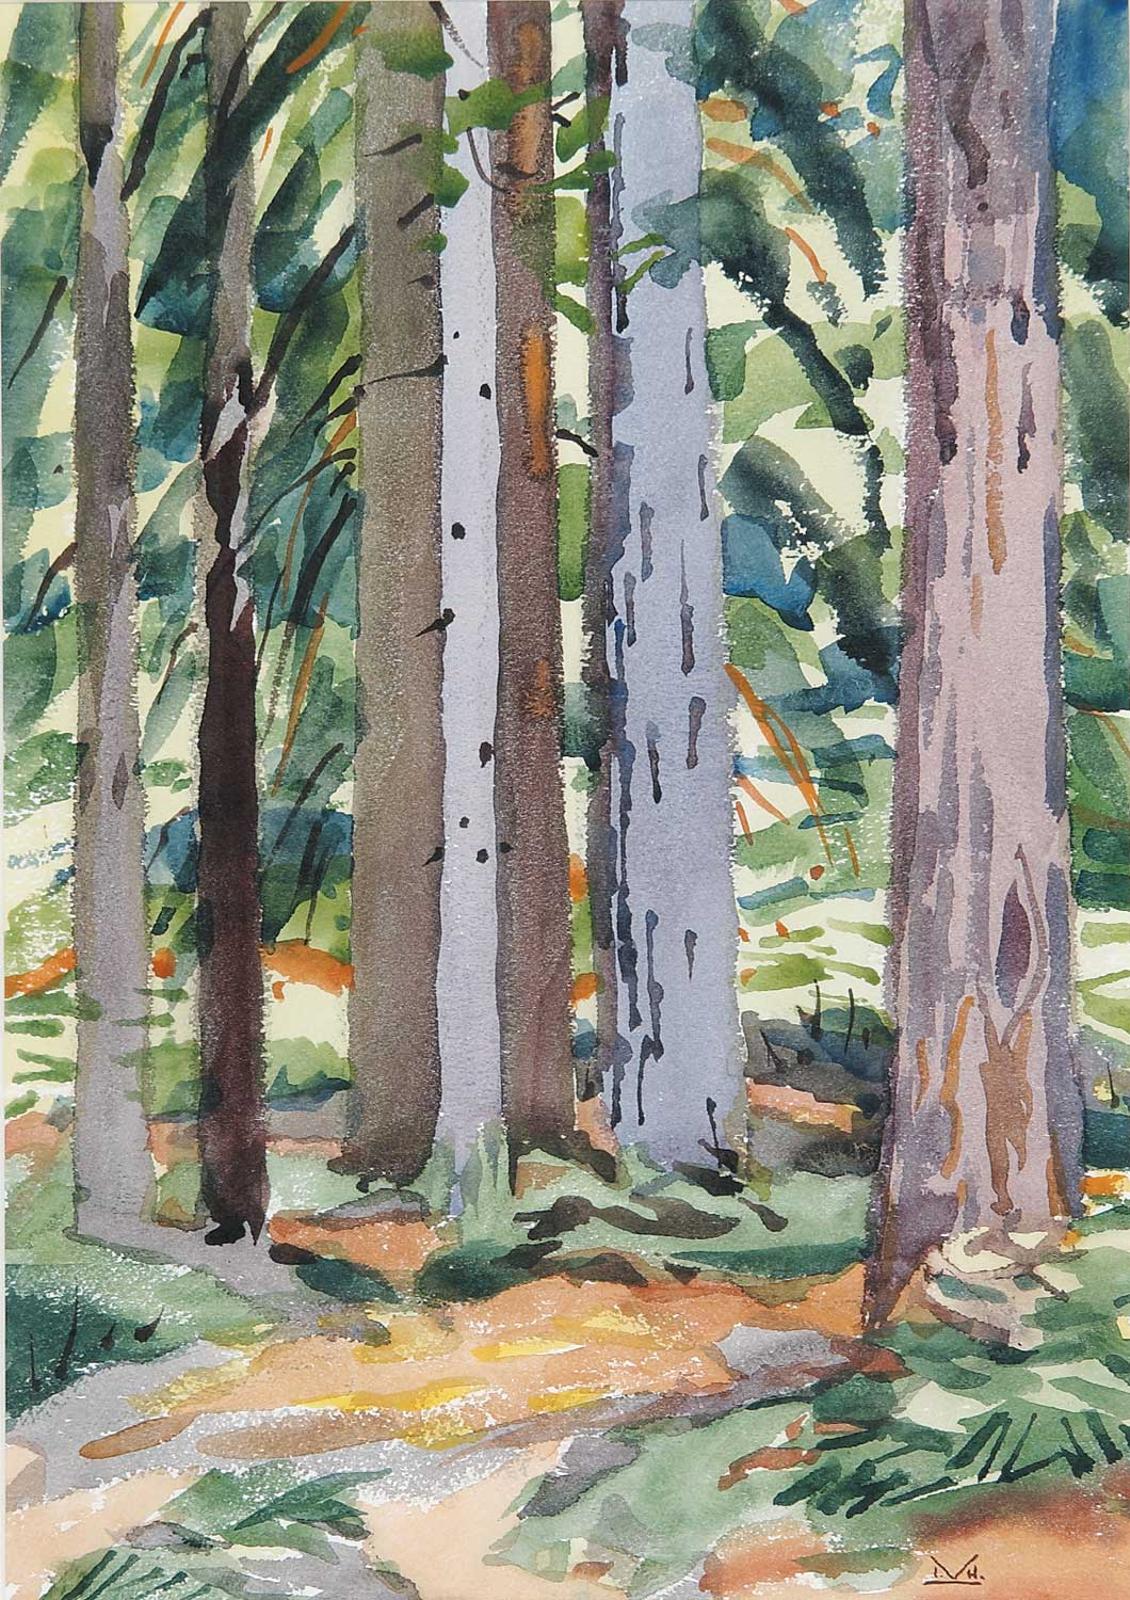 Illingworth Holey (Buck) Kerr (1905-1989) - Young Redwoods No. 1